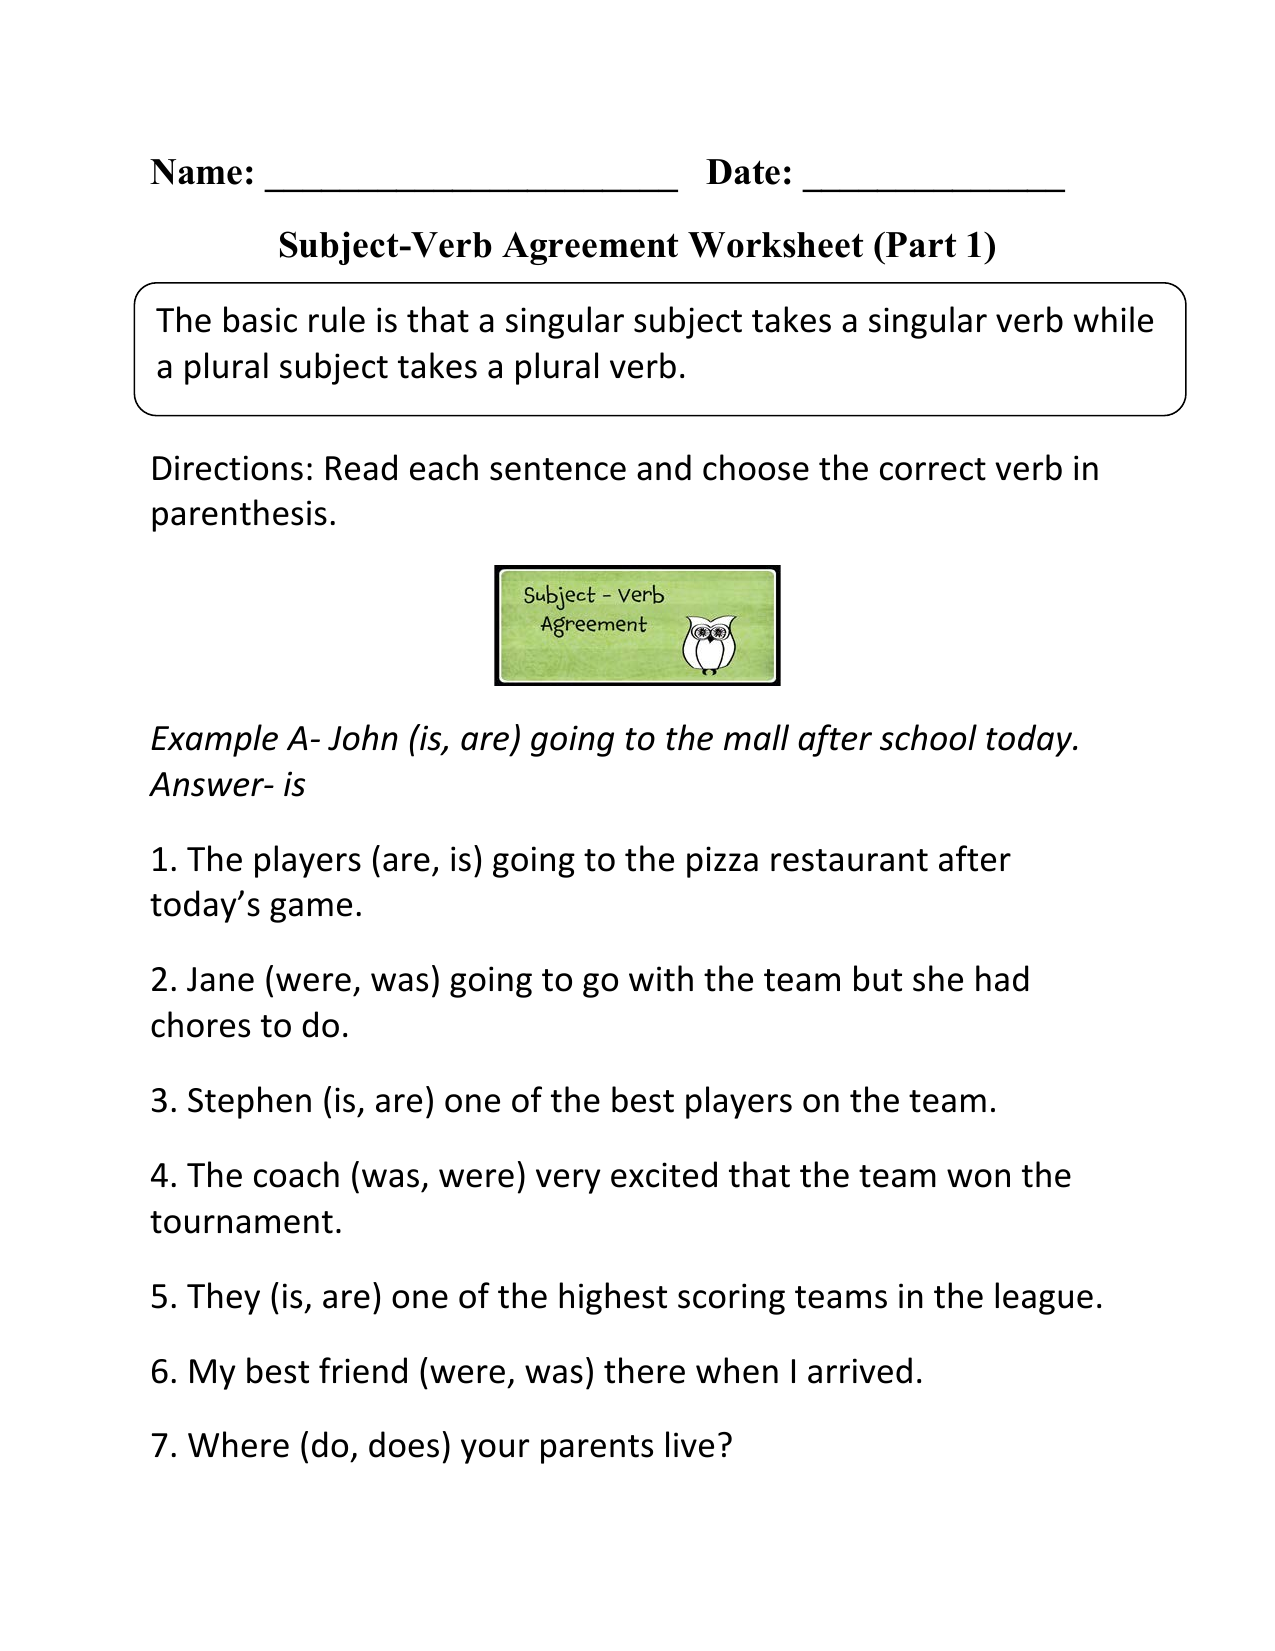 subject-verb-agreement-worksheets-practicing-subject-verb-agreement-worksheet